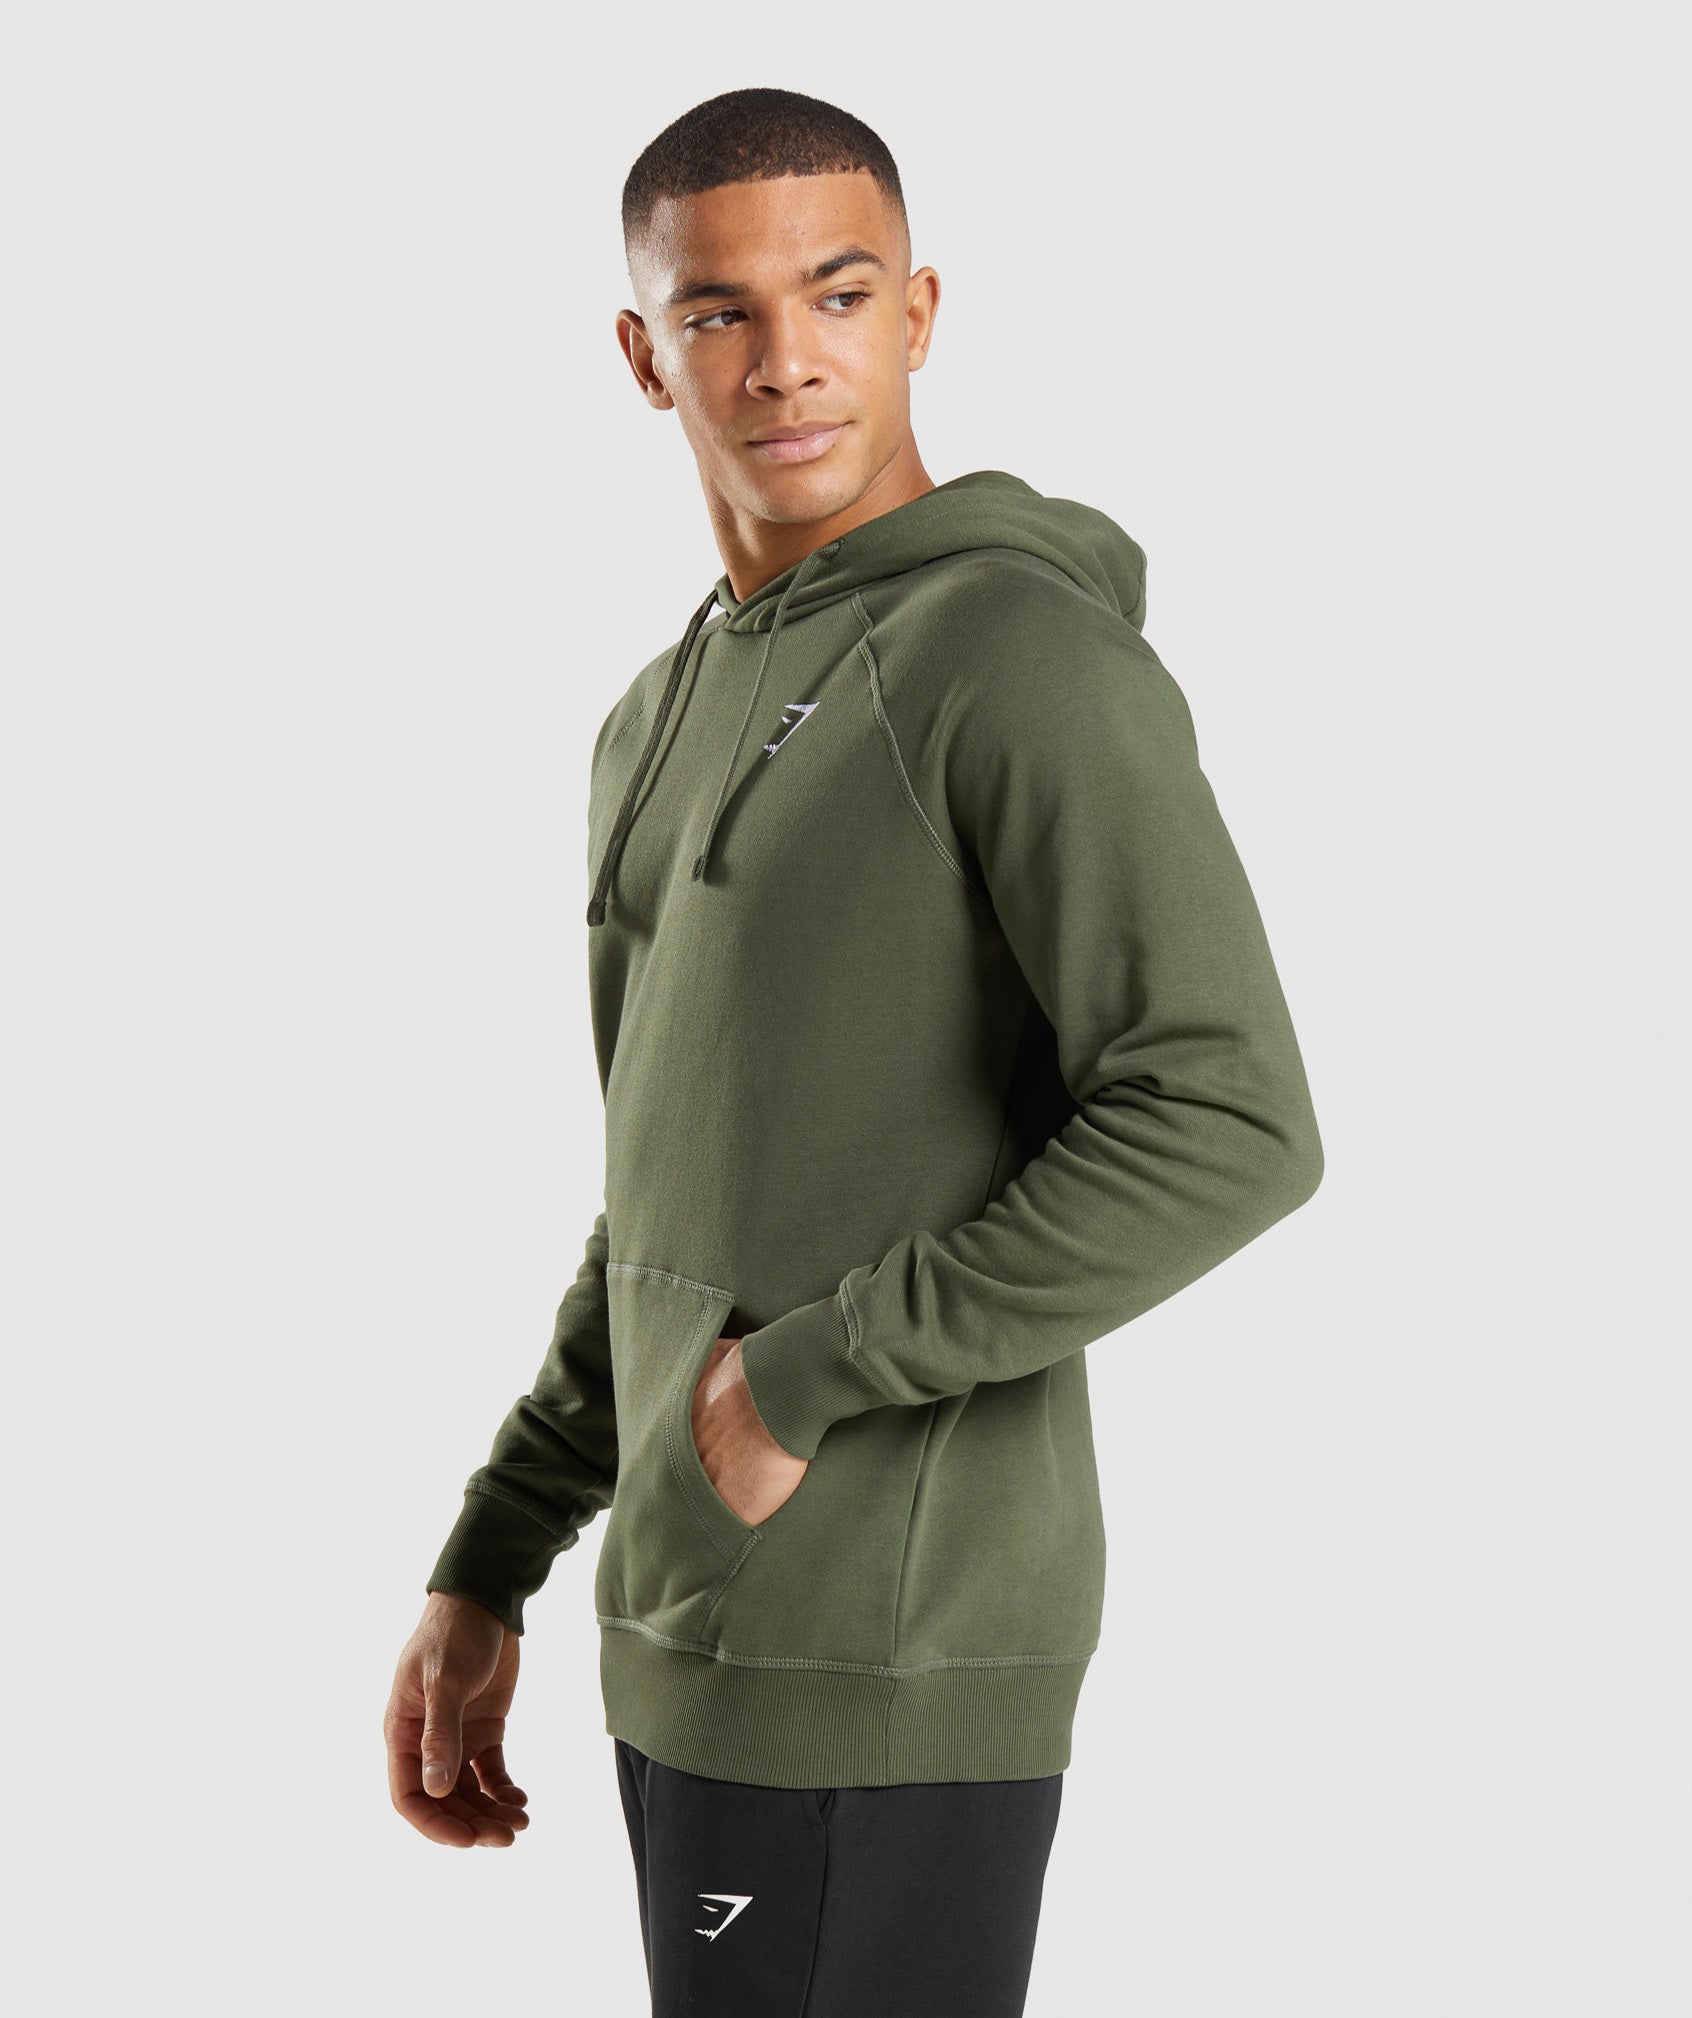 Crest Hoodie in Core Olive - view 3